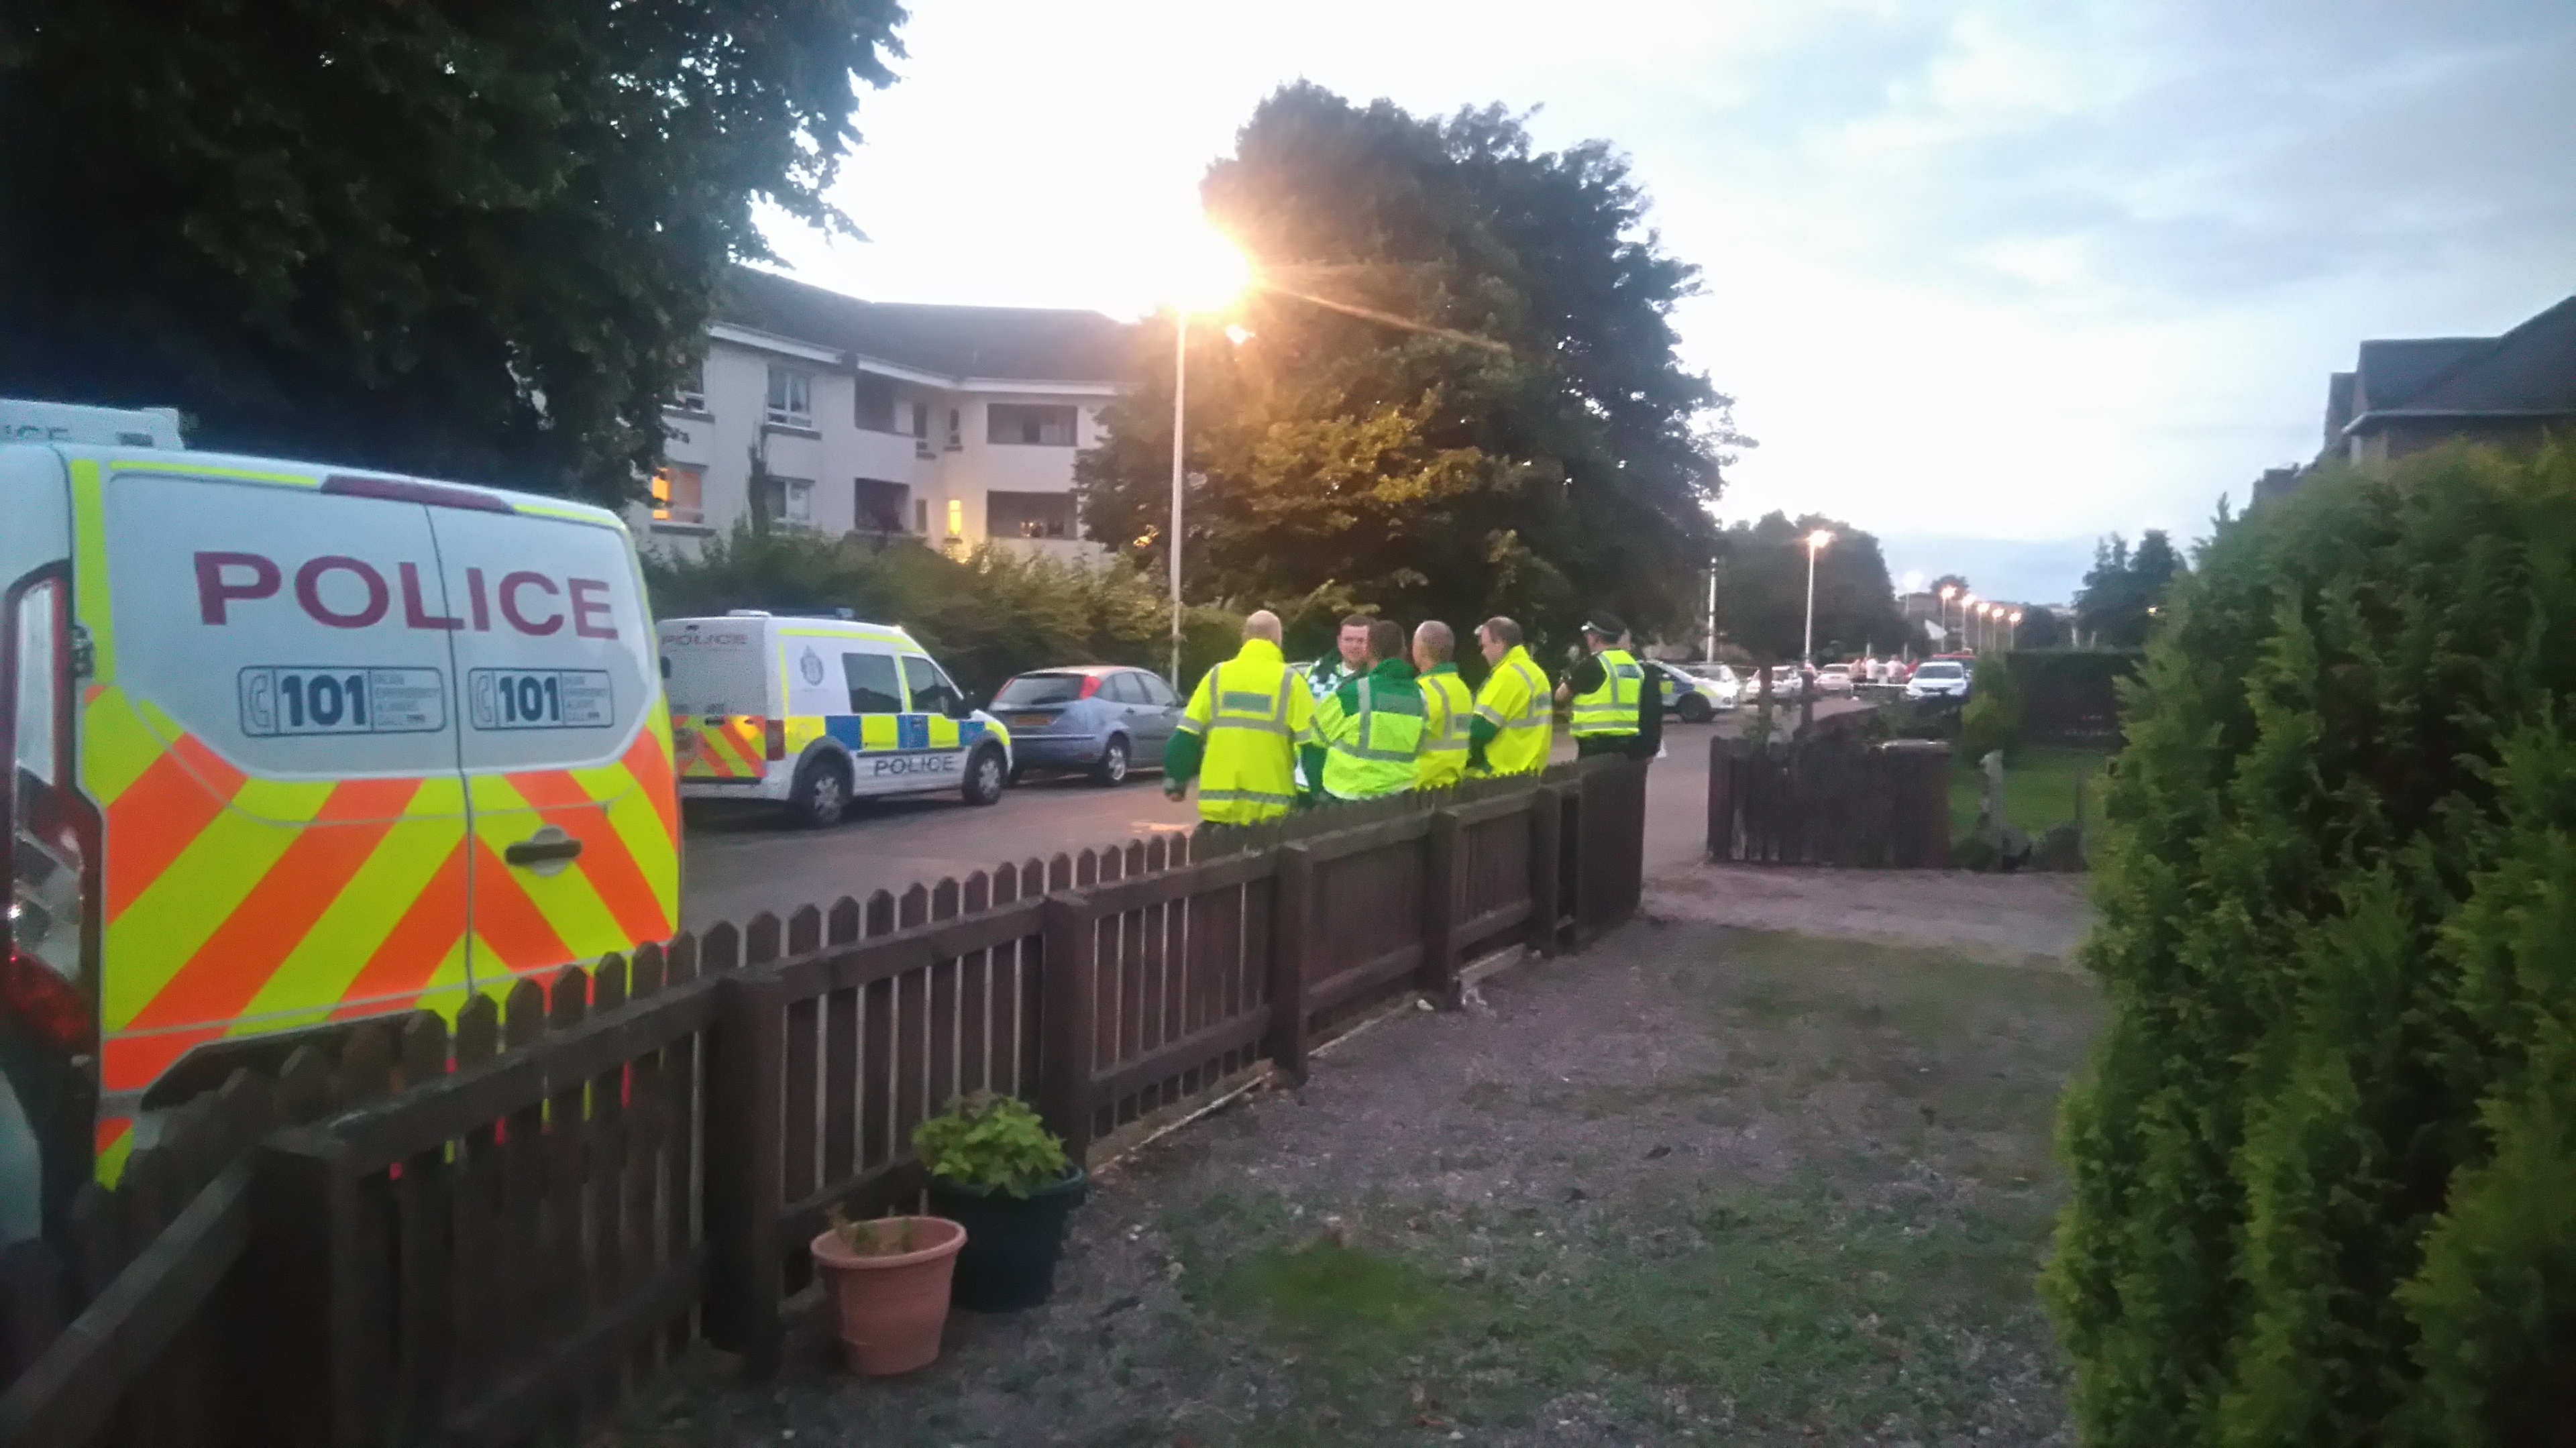 Police and ambulance at the scene of the incident in Inverness